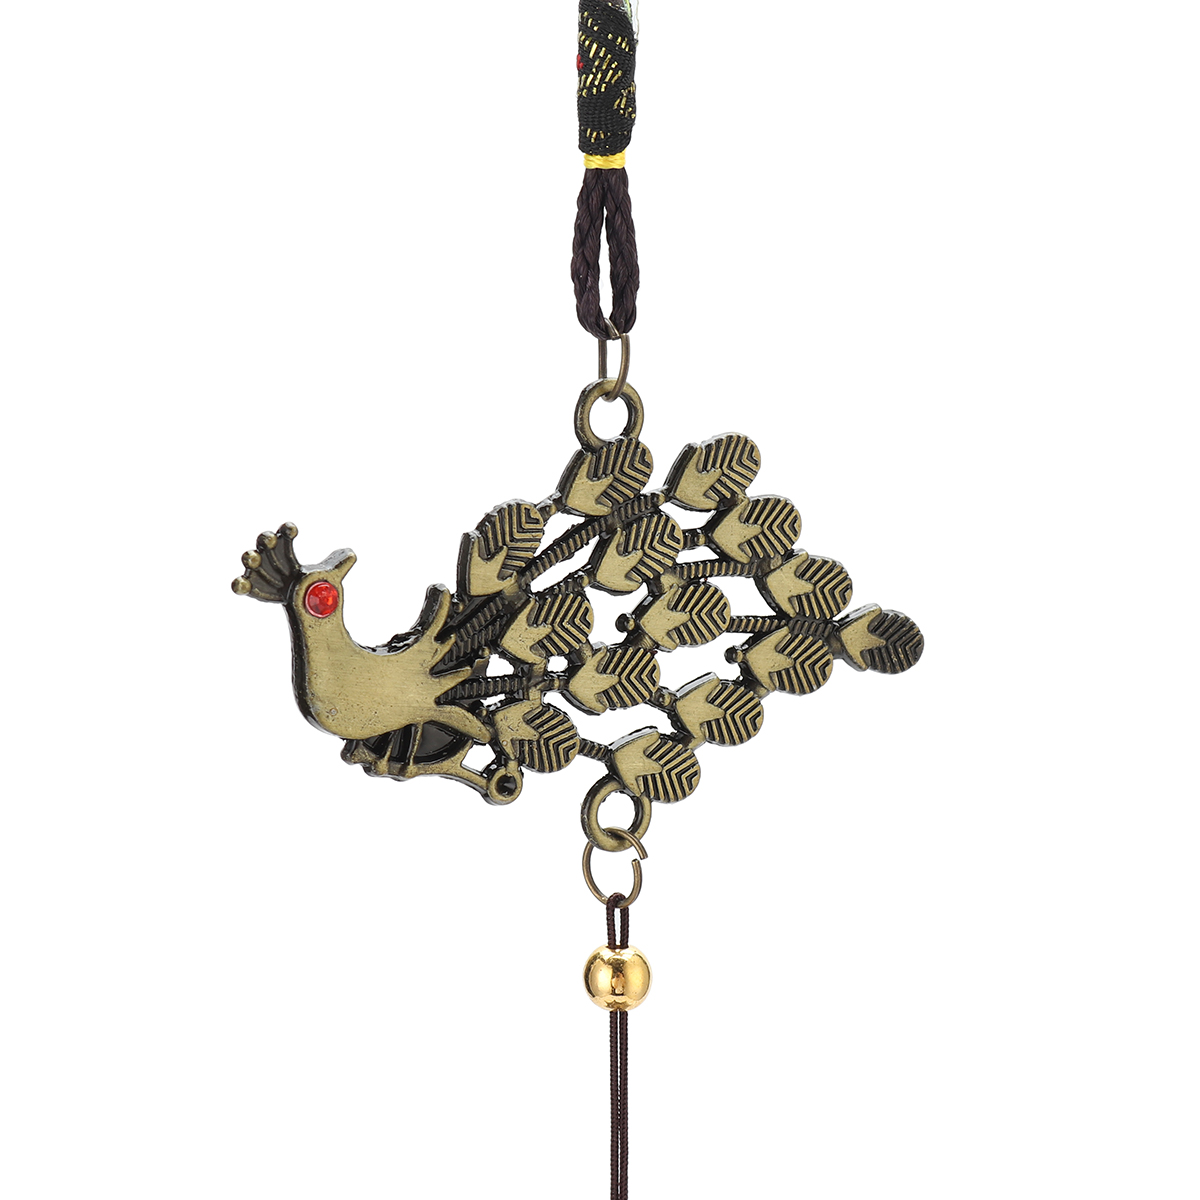 Copper-Lucky-Feng-Shui-Wind-Chime-Hanging-Bell-Jingle-Doorative-Pendant-Charm-1745703-4